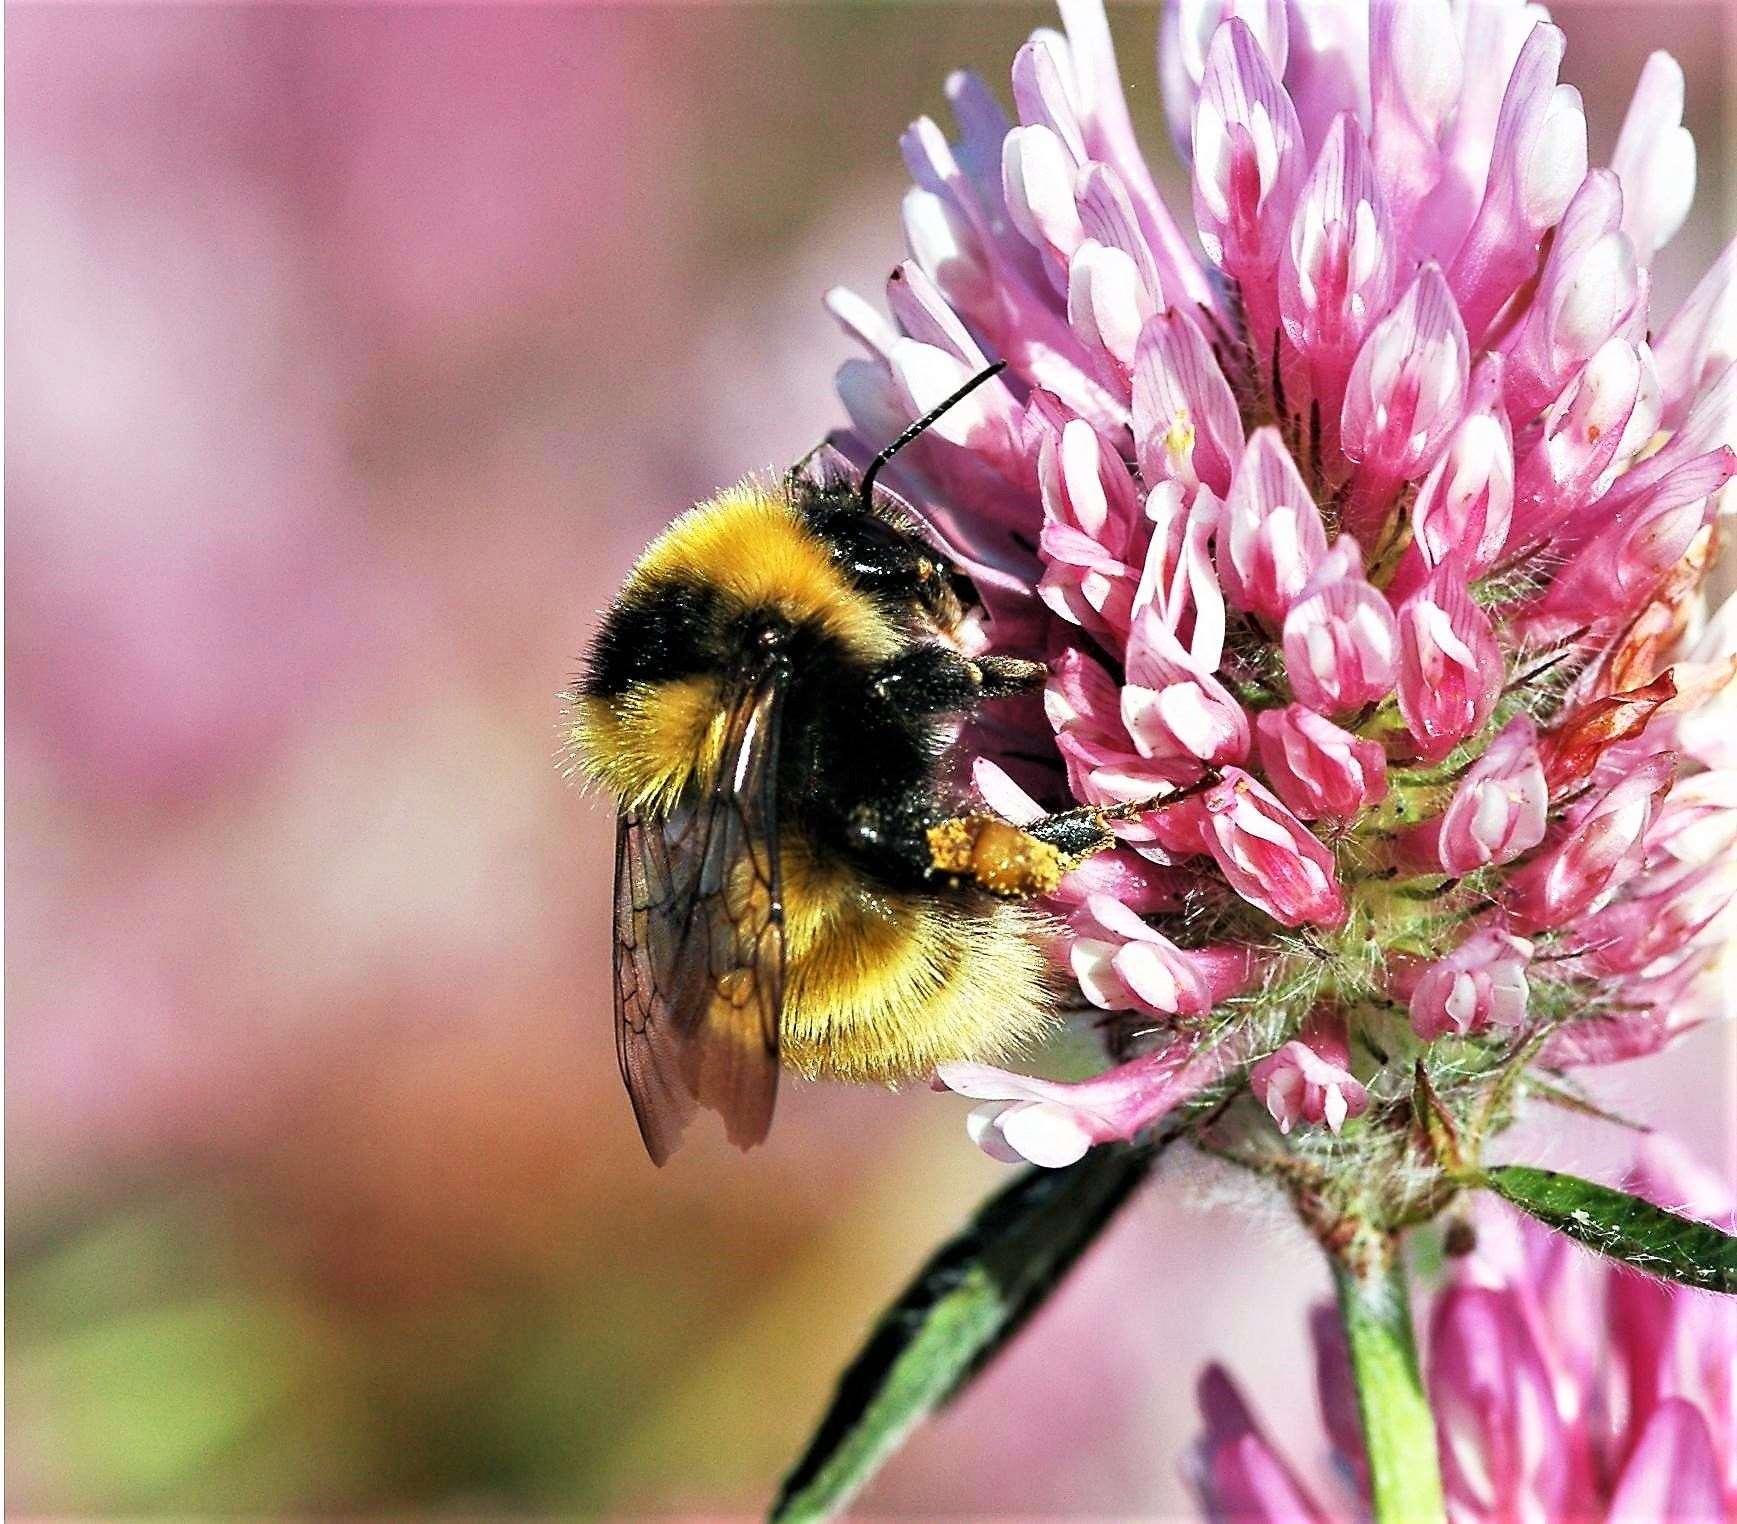 The very rare Great yellow bumblebee Bombus distinguendus which is found in Caithness. Picture: Pieter Haringsma